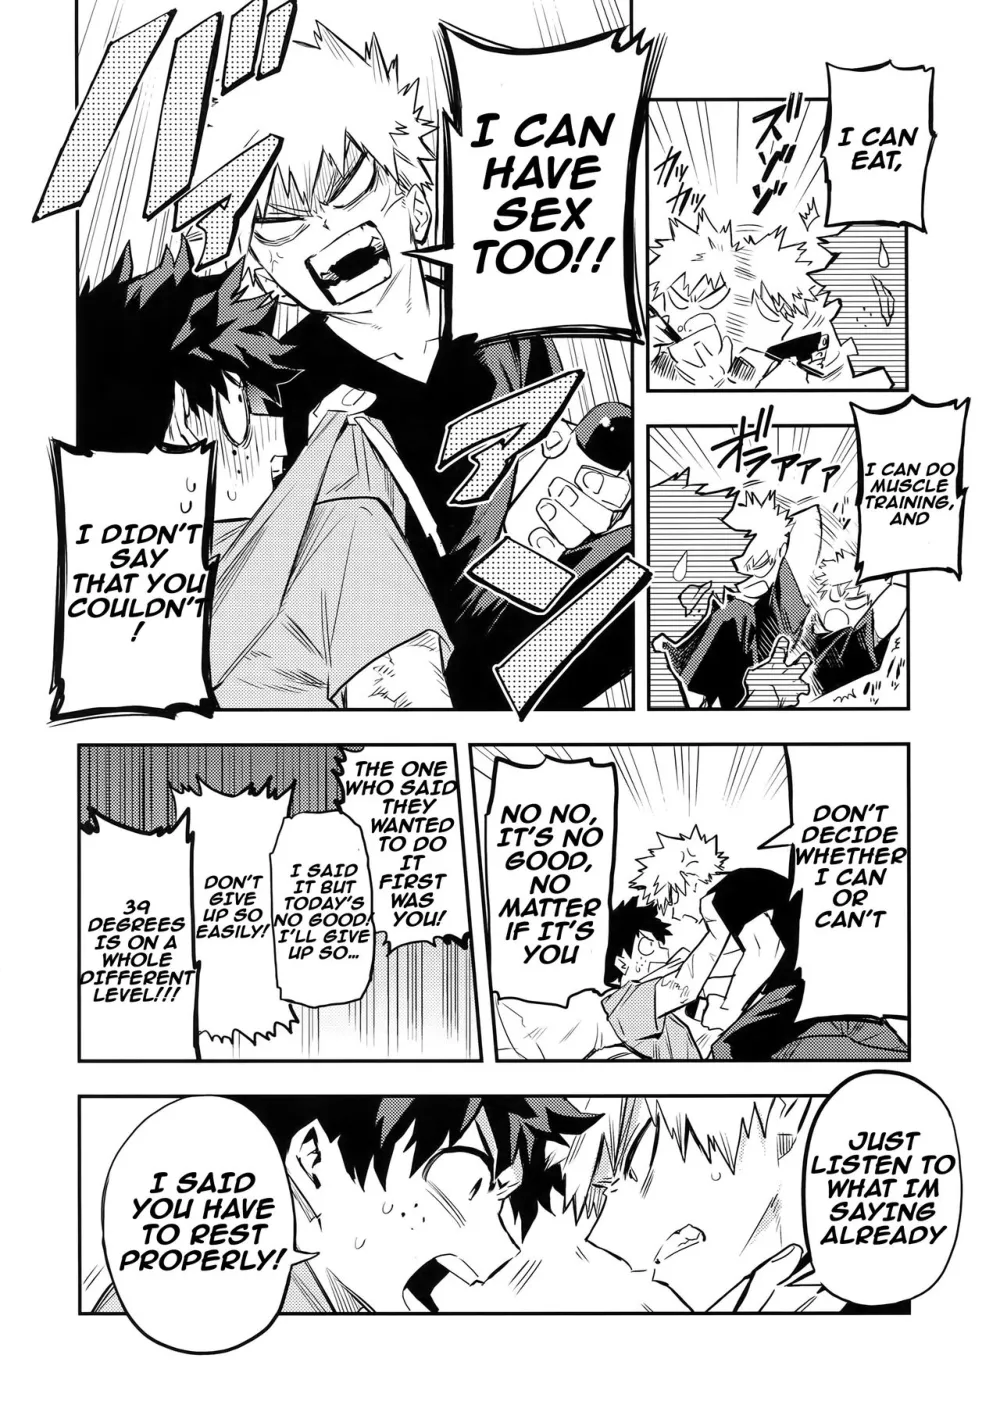 The Battle Between Sick Kacchan and Me - Page 7